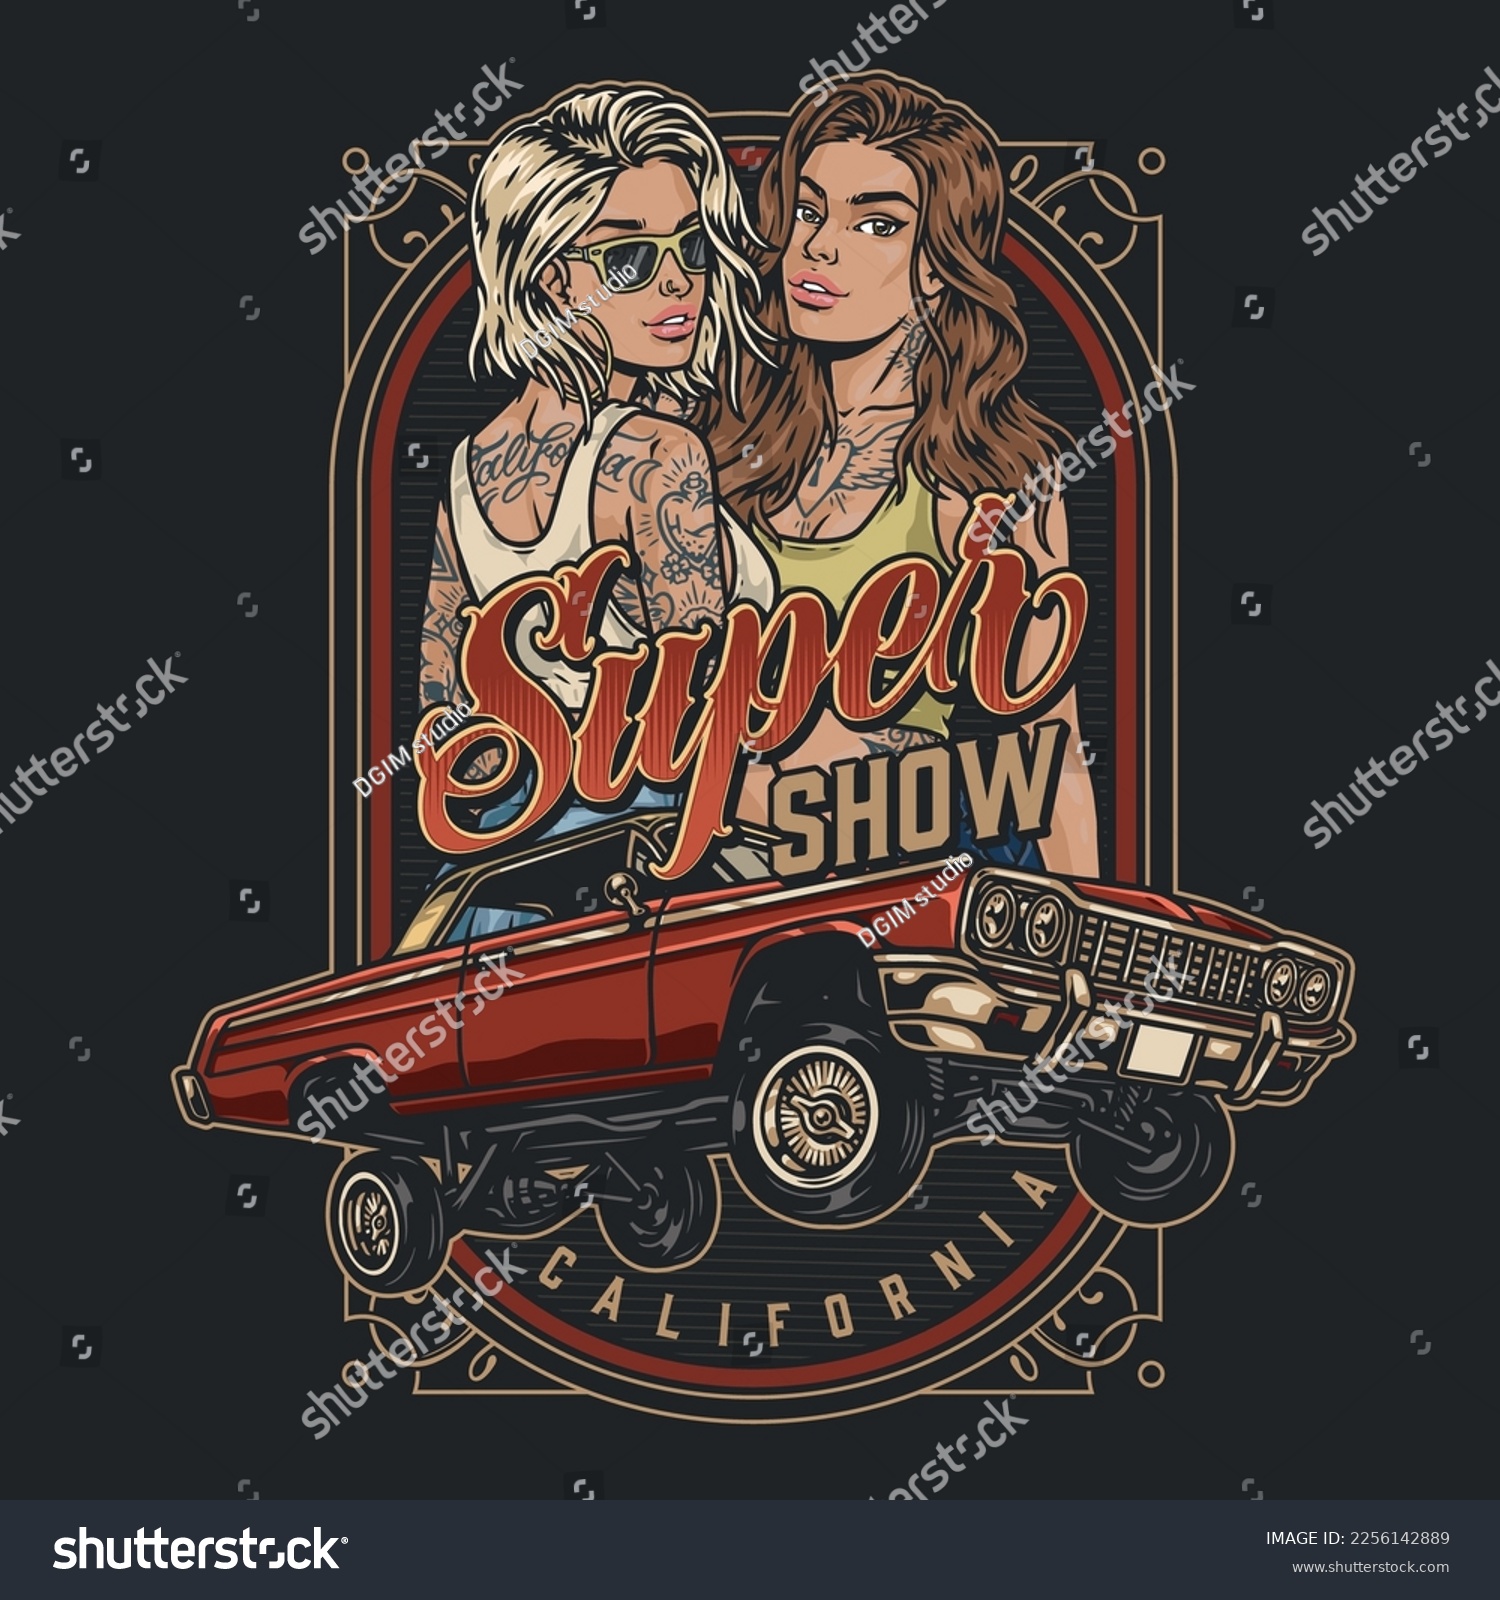 SVG of Racing car show flyer colorful daring girls inviting drivers to take part in competitions lowriders or street racers vector illustration svg